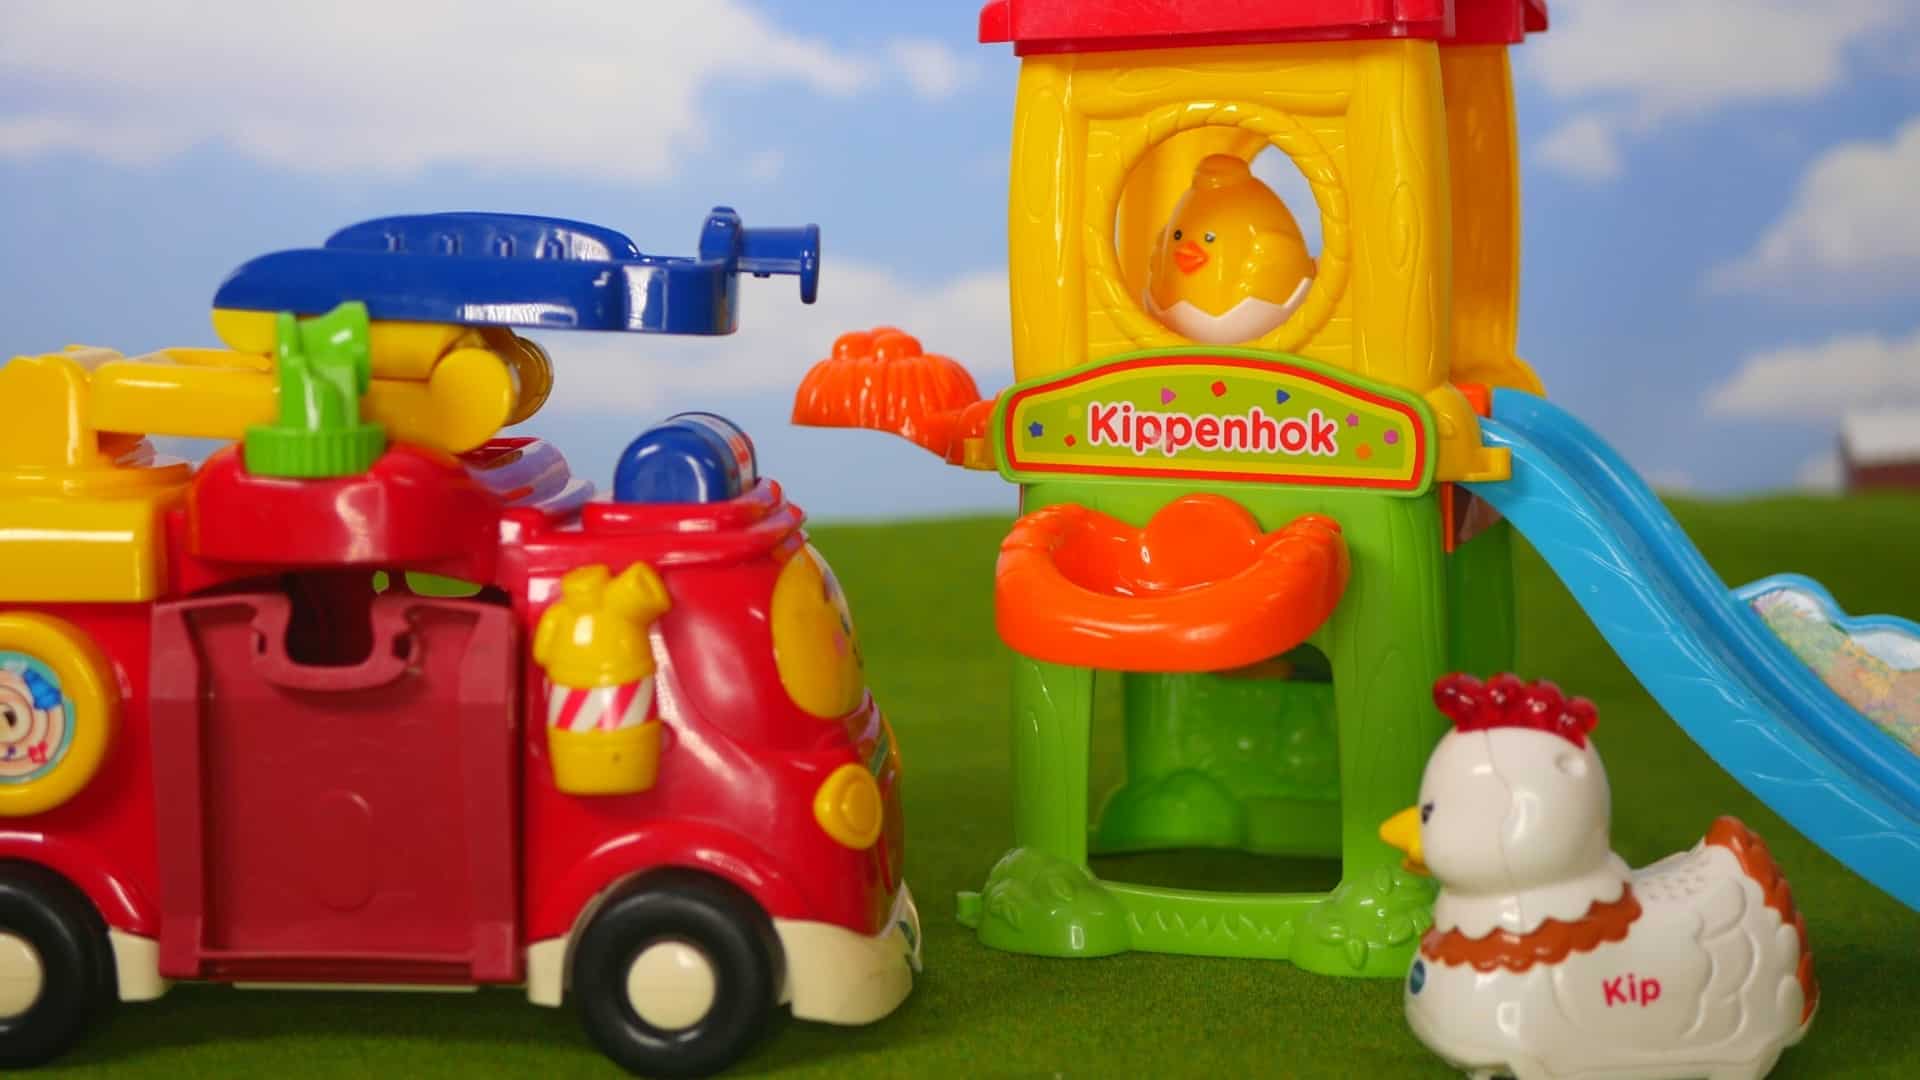 Zoom Zoef animal playsets from Vtech